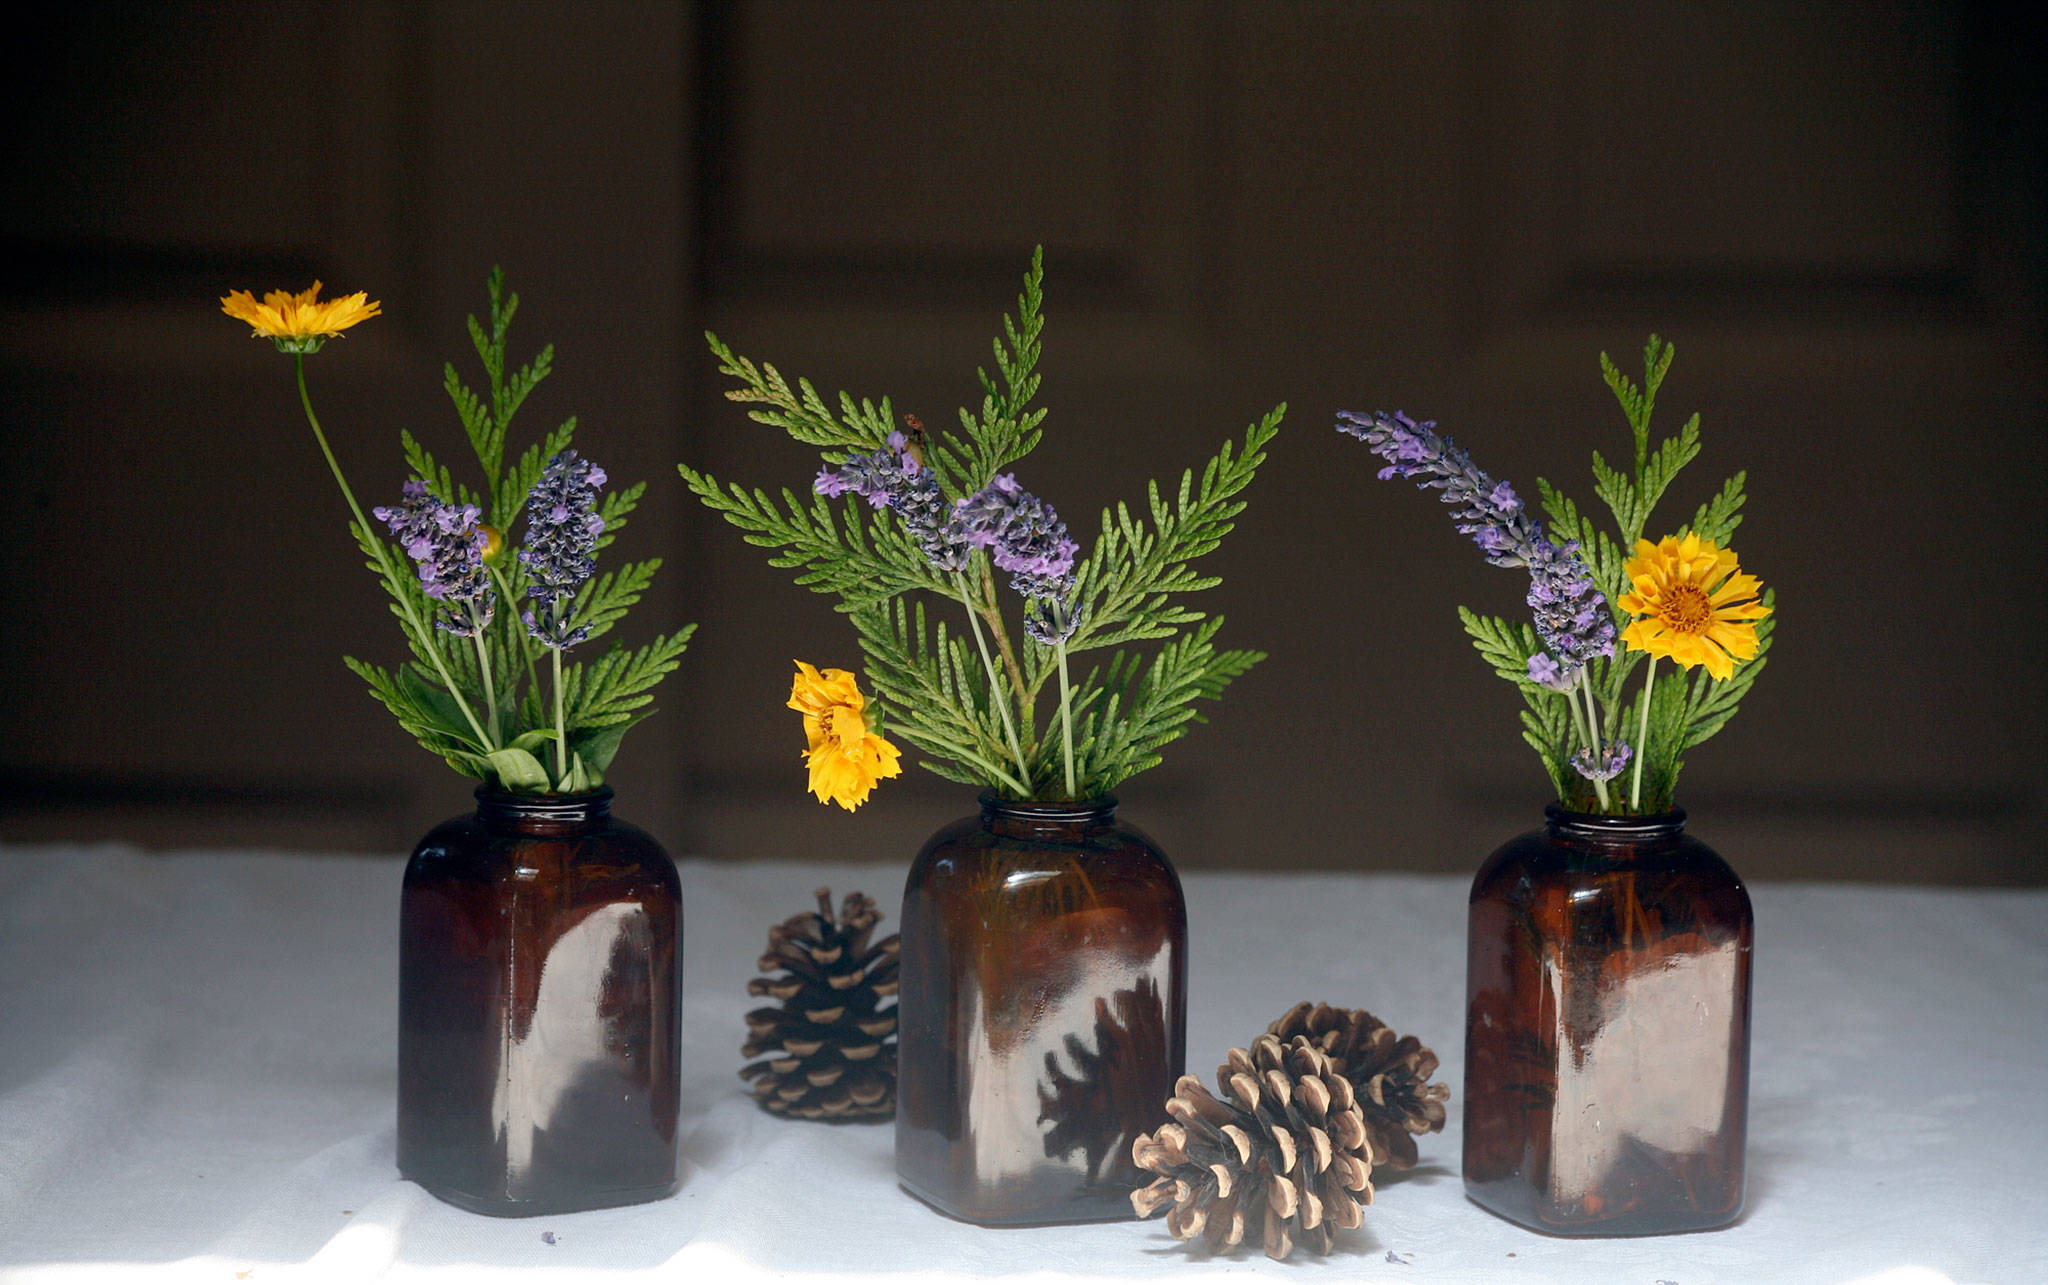 Adding single stems of coreopsis and lavender to each jar adds a little pop of color. When the flowers fade, take them out and the cedar will still last for days. (Vanessa McVay / The Herald)